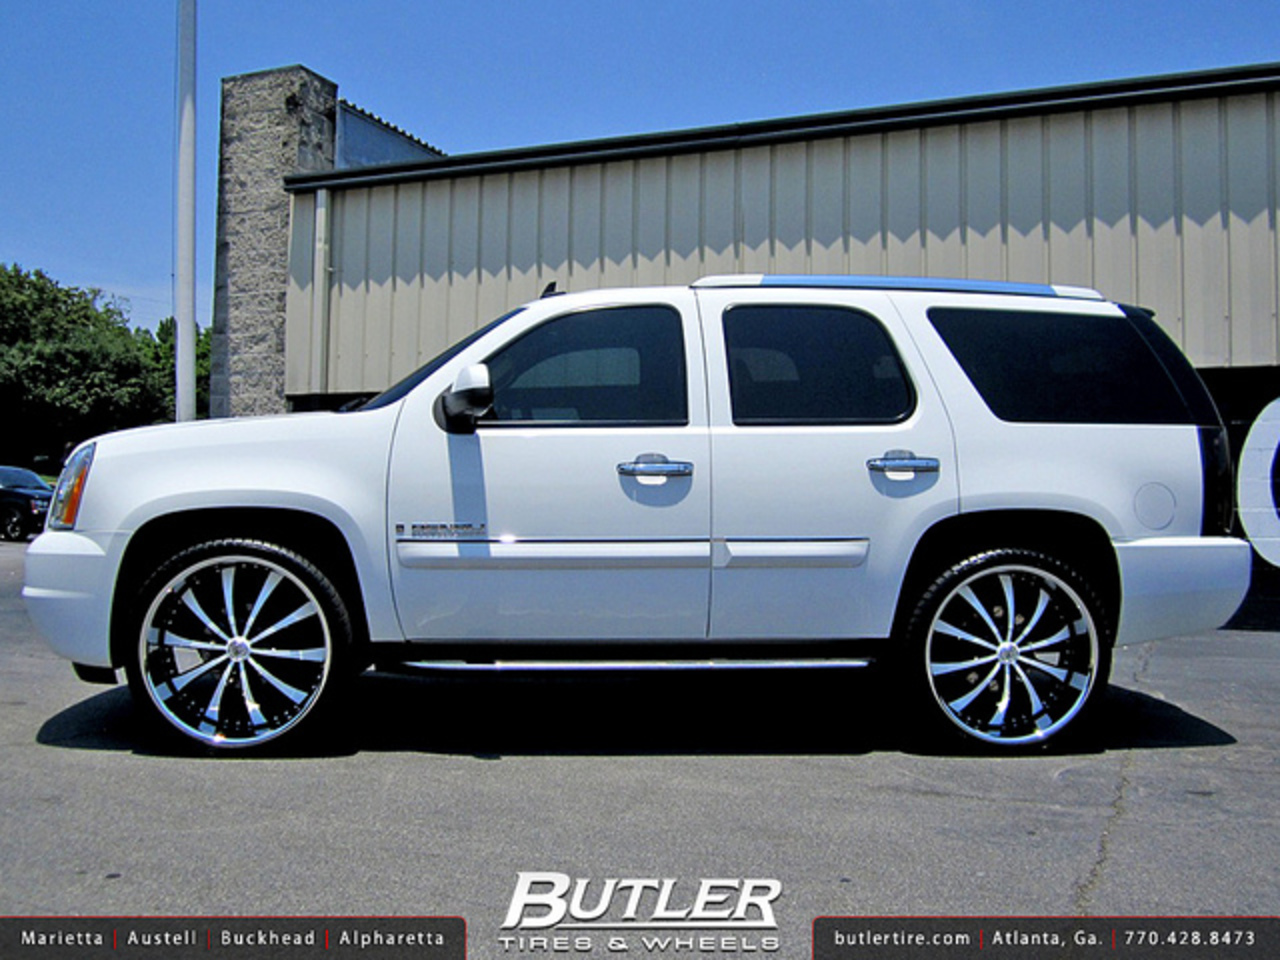 GMC Denali with 26in Lexani LSS10 Wheels | Flickr - Photo Sharing!